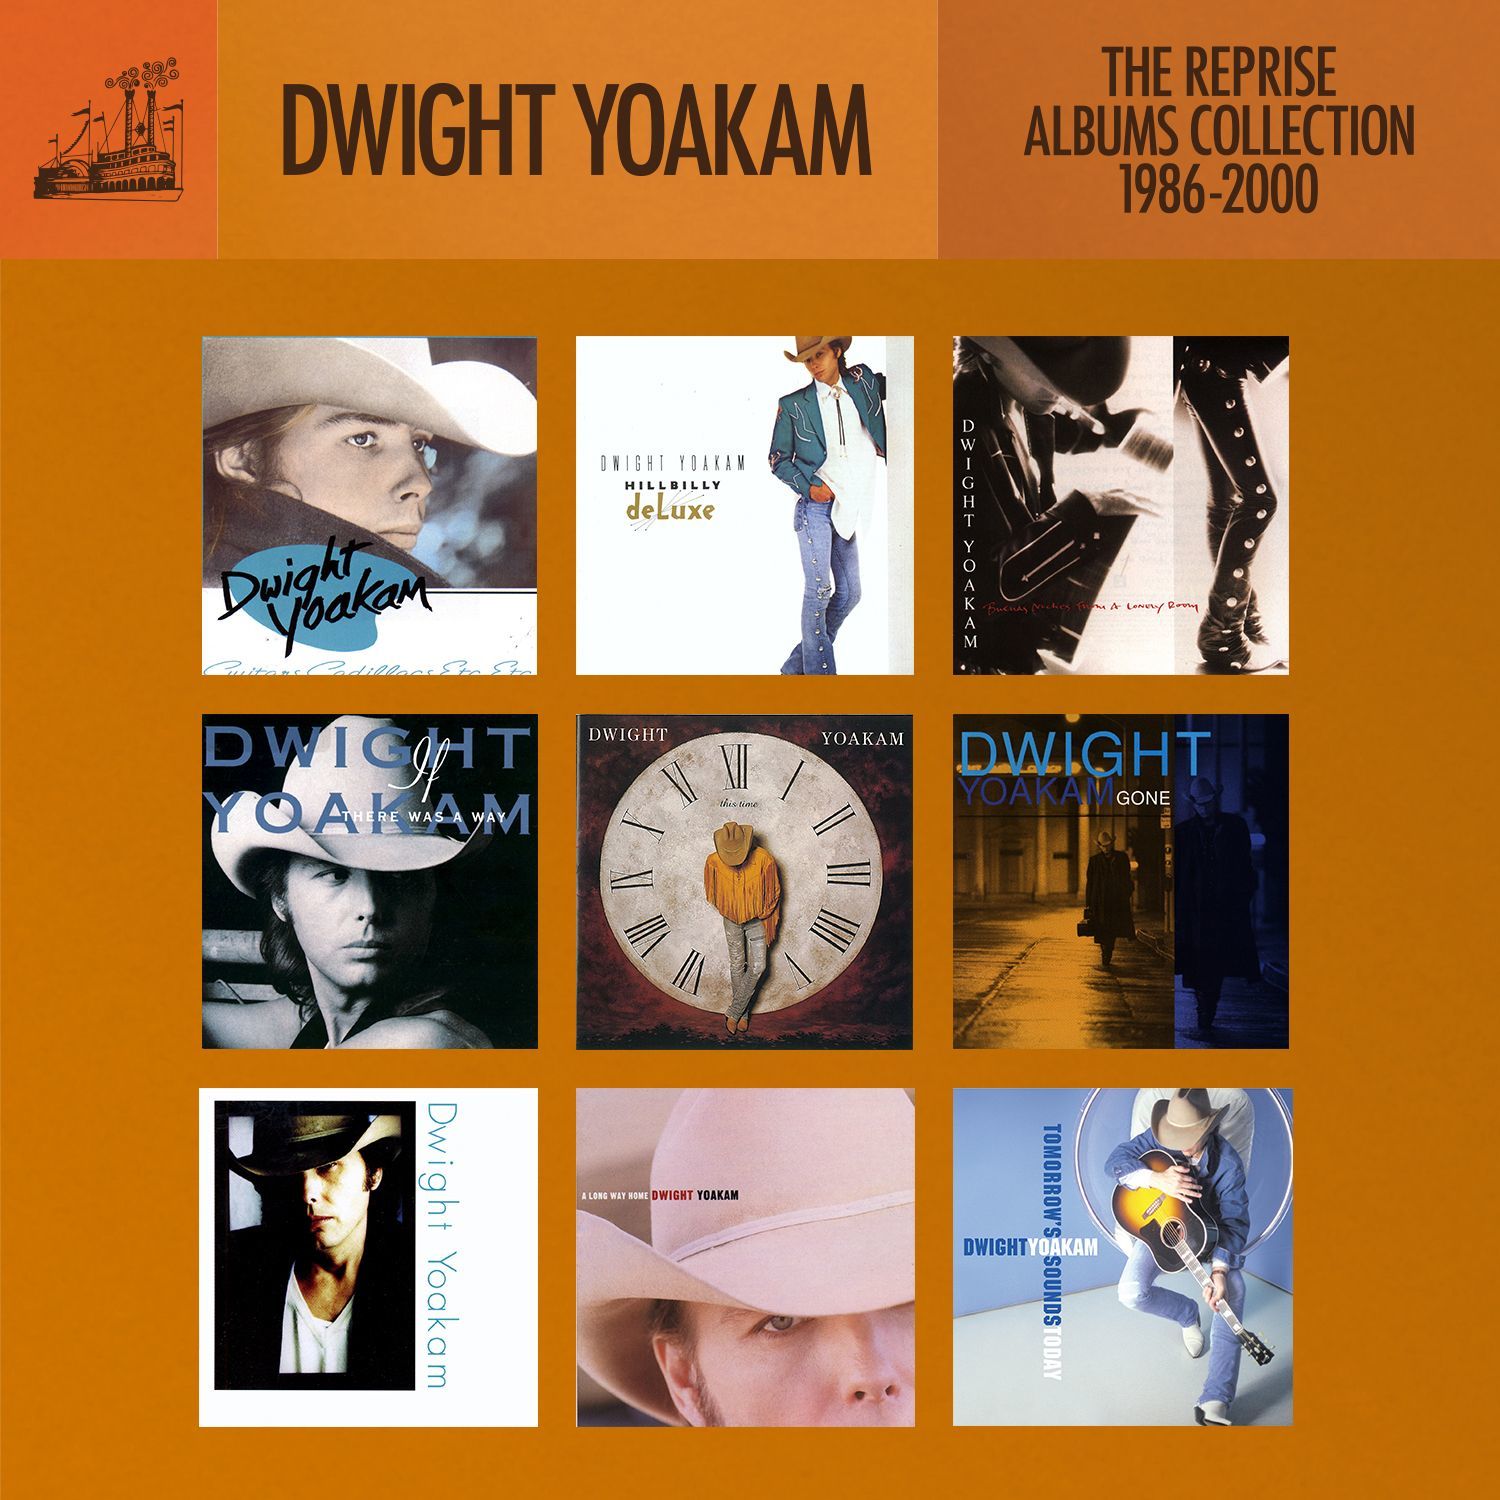 Dwight Yoakam – The Reprise Albums Collection – 1986-2000